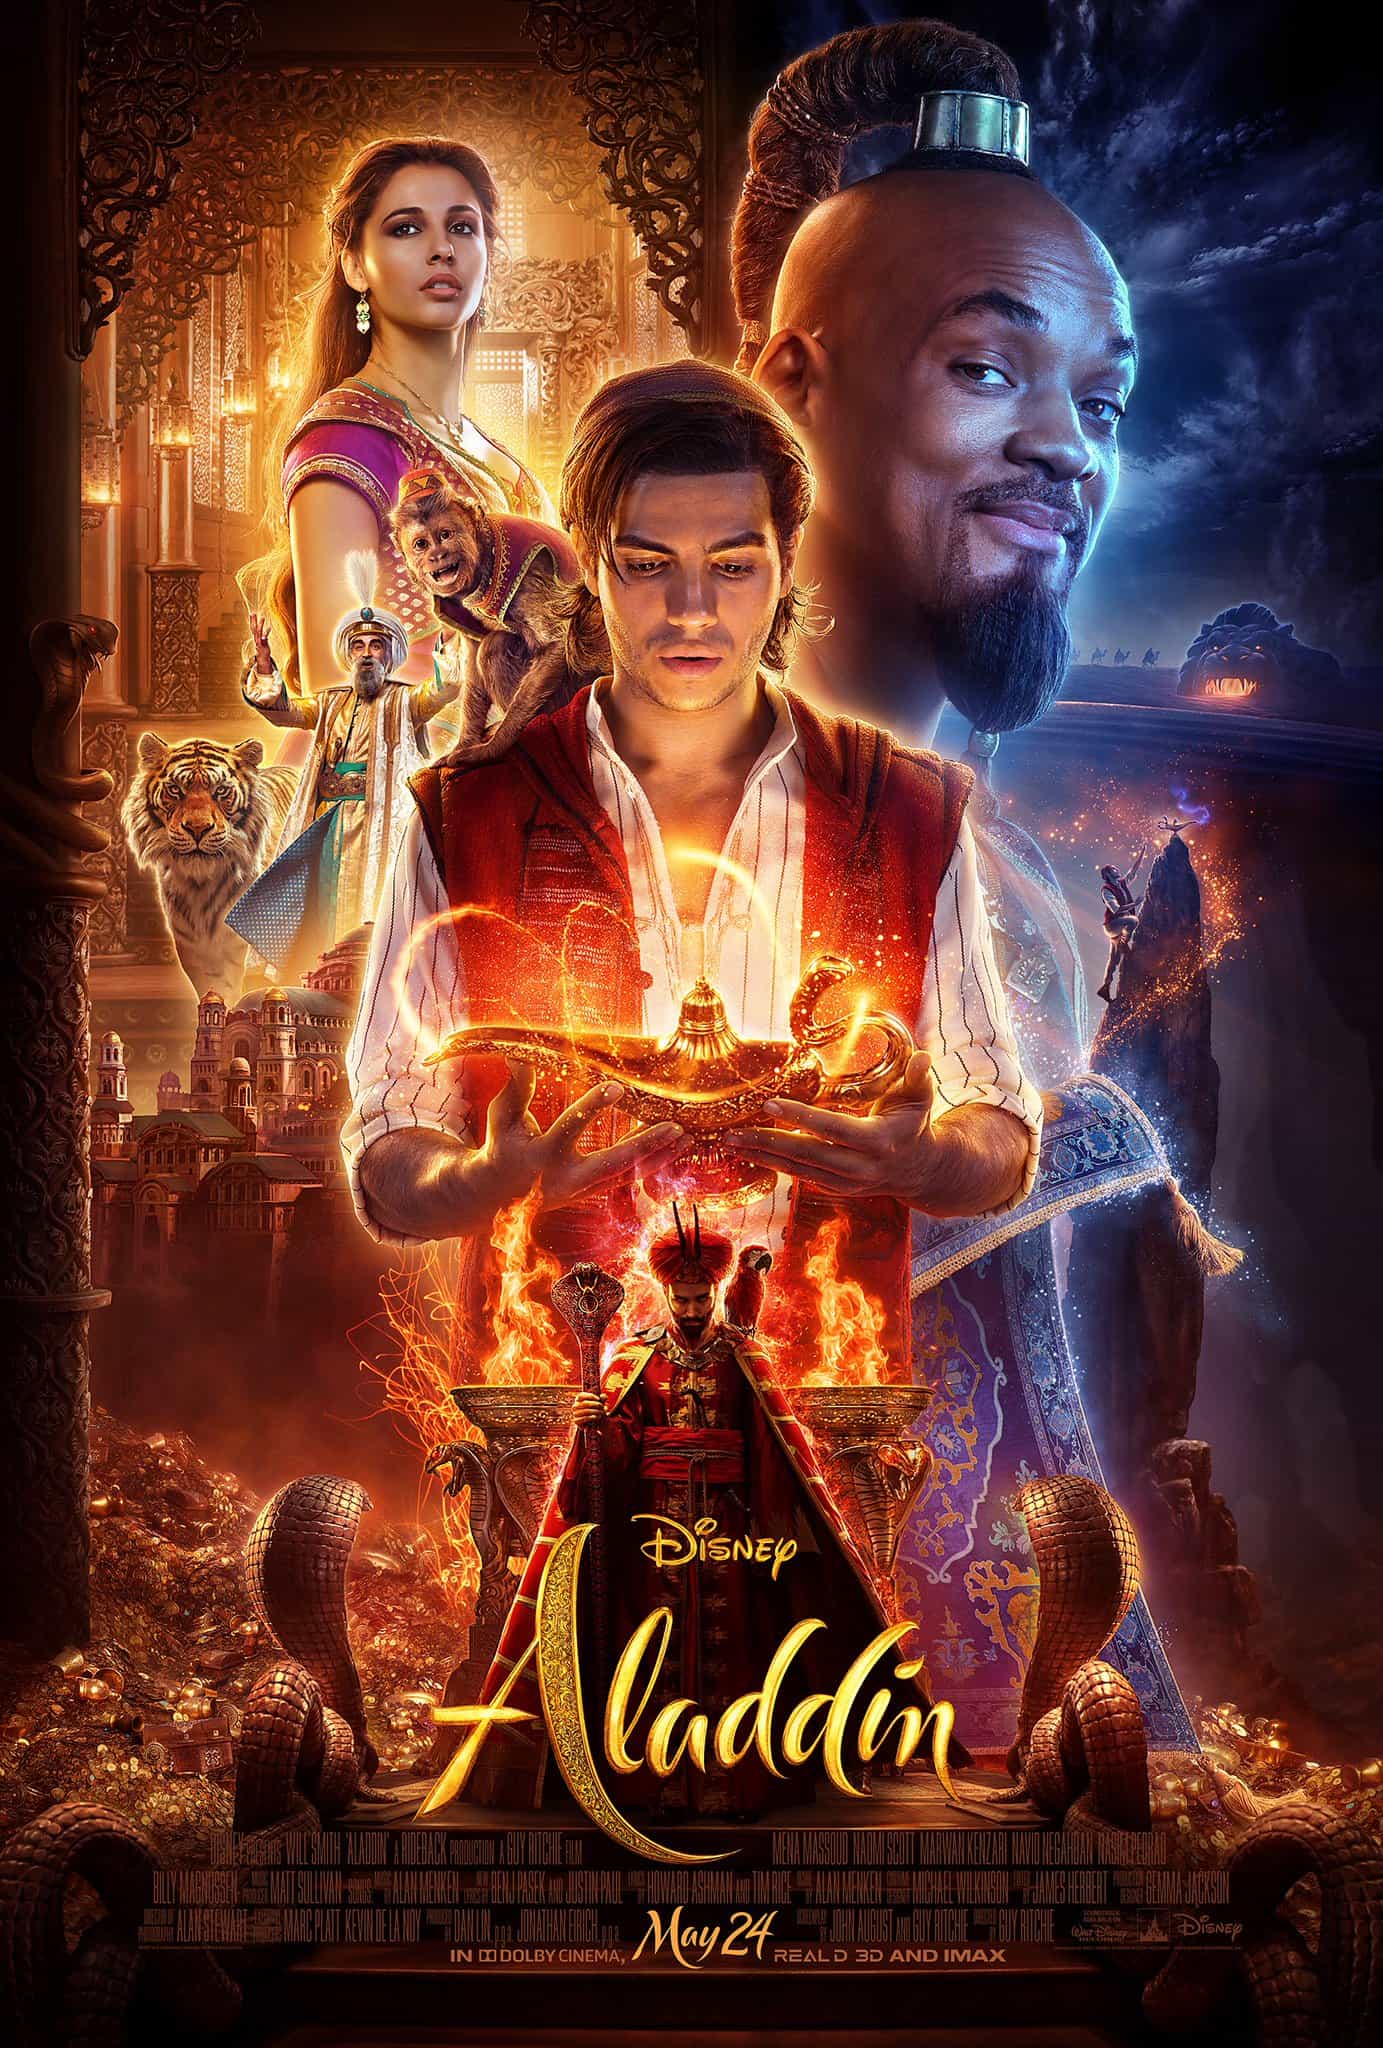 New full trailer for the live action Aladdin from Disney featuring Aladdin, Jasmine, Jafar and a blue Will Smith as Genie